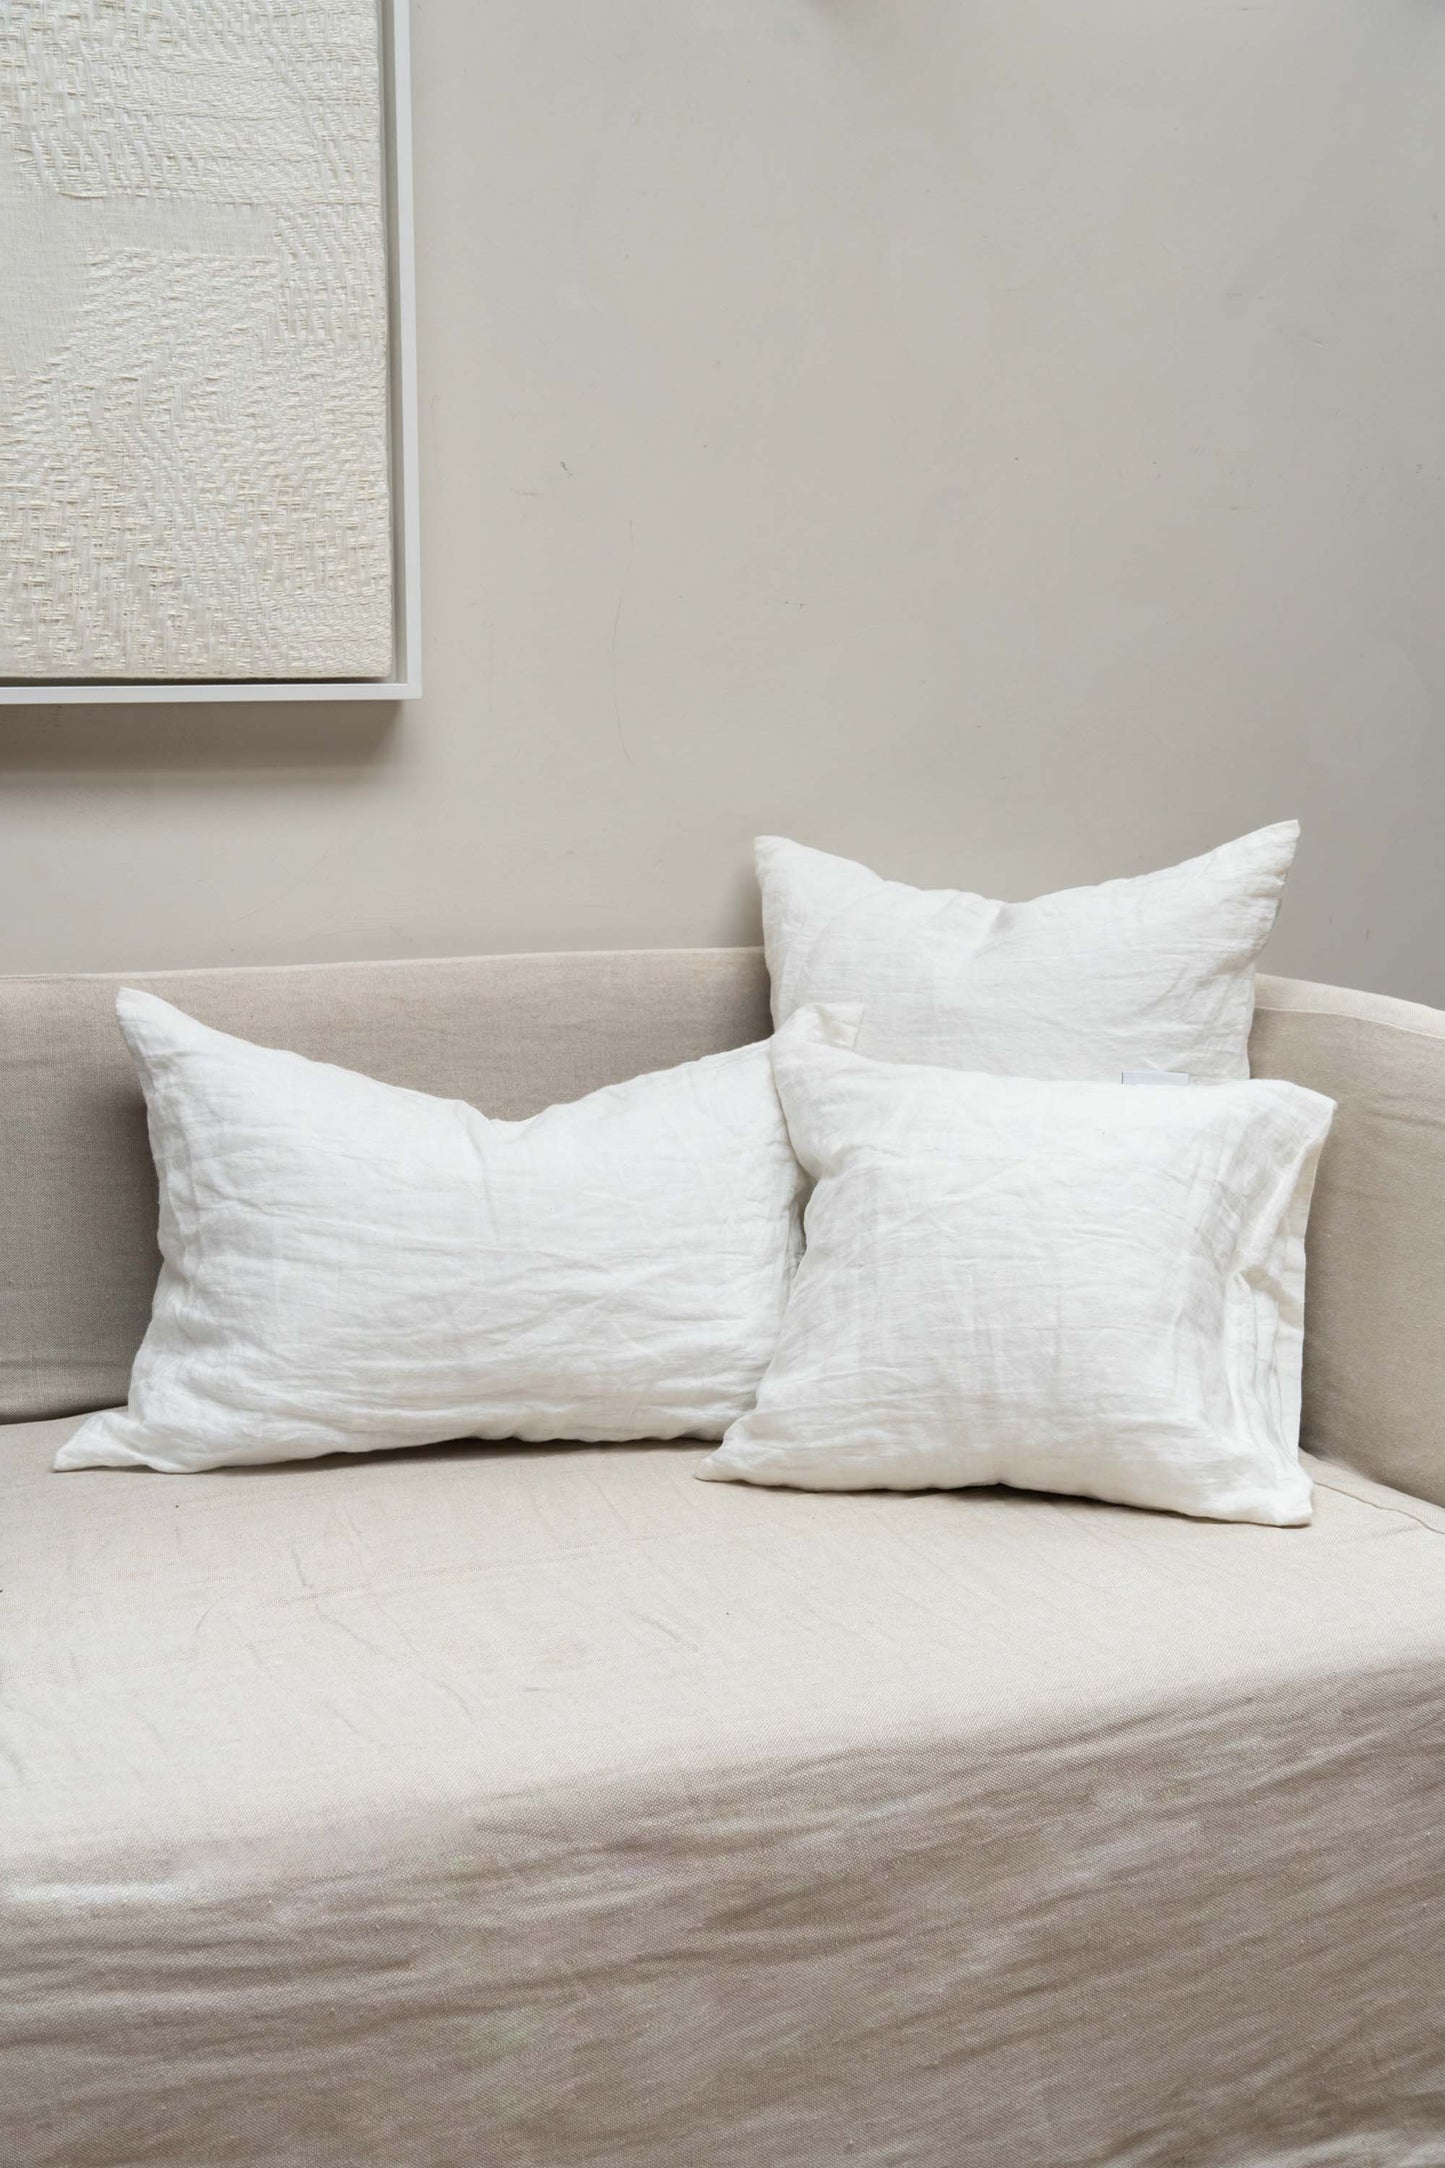 Off White Linen Cushions by Timeless Linen set on couch in a light and neutral interior at Enter The Loft.